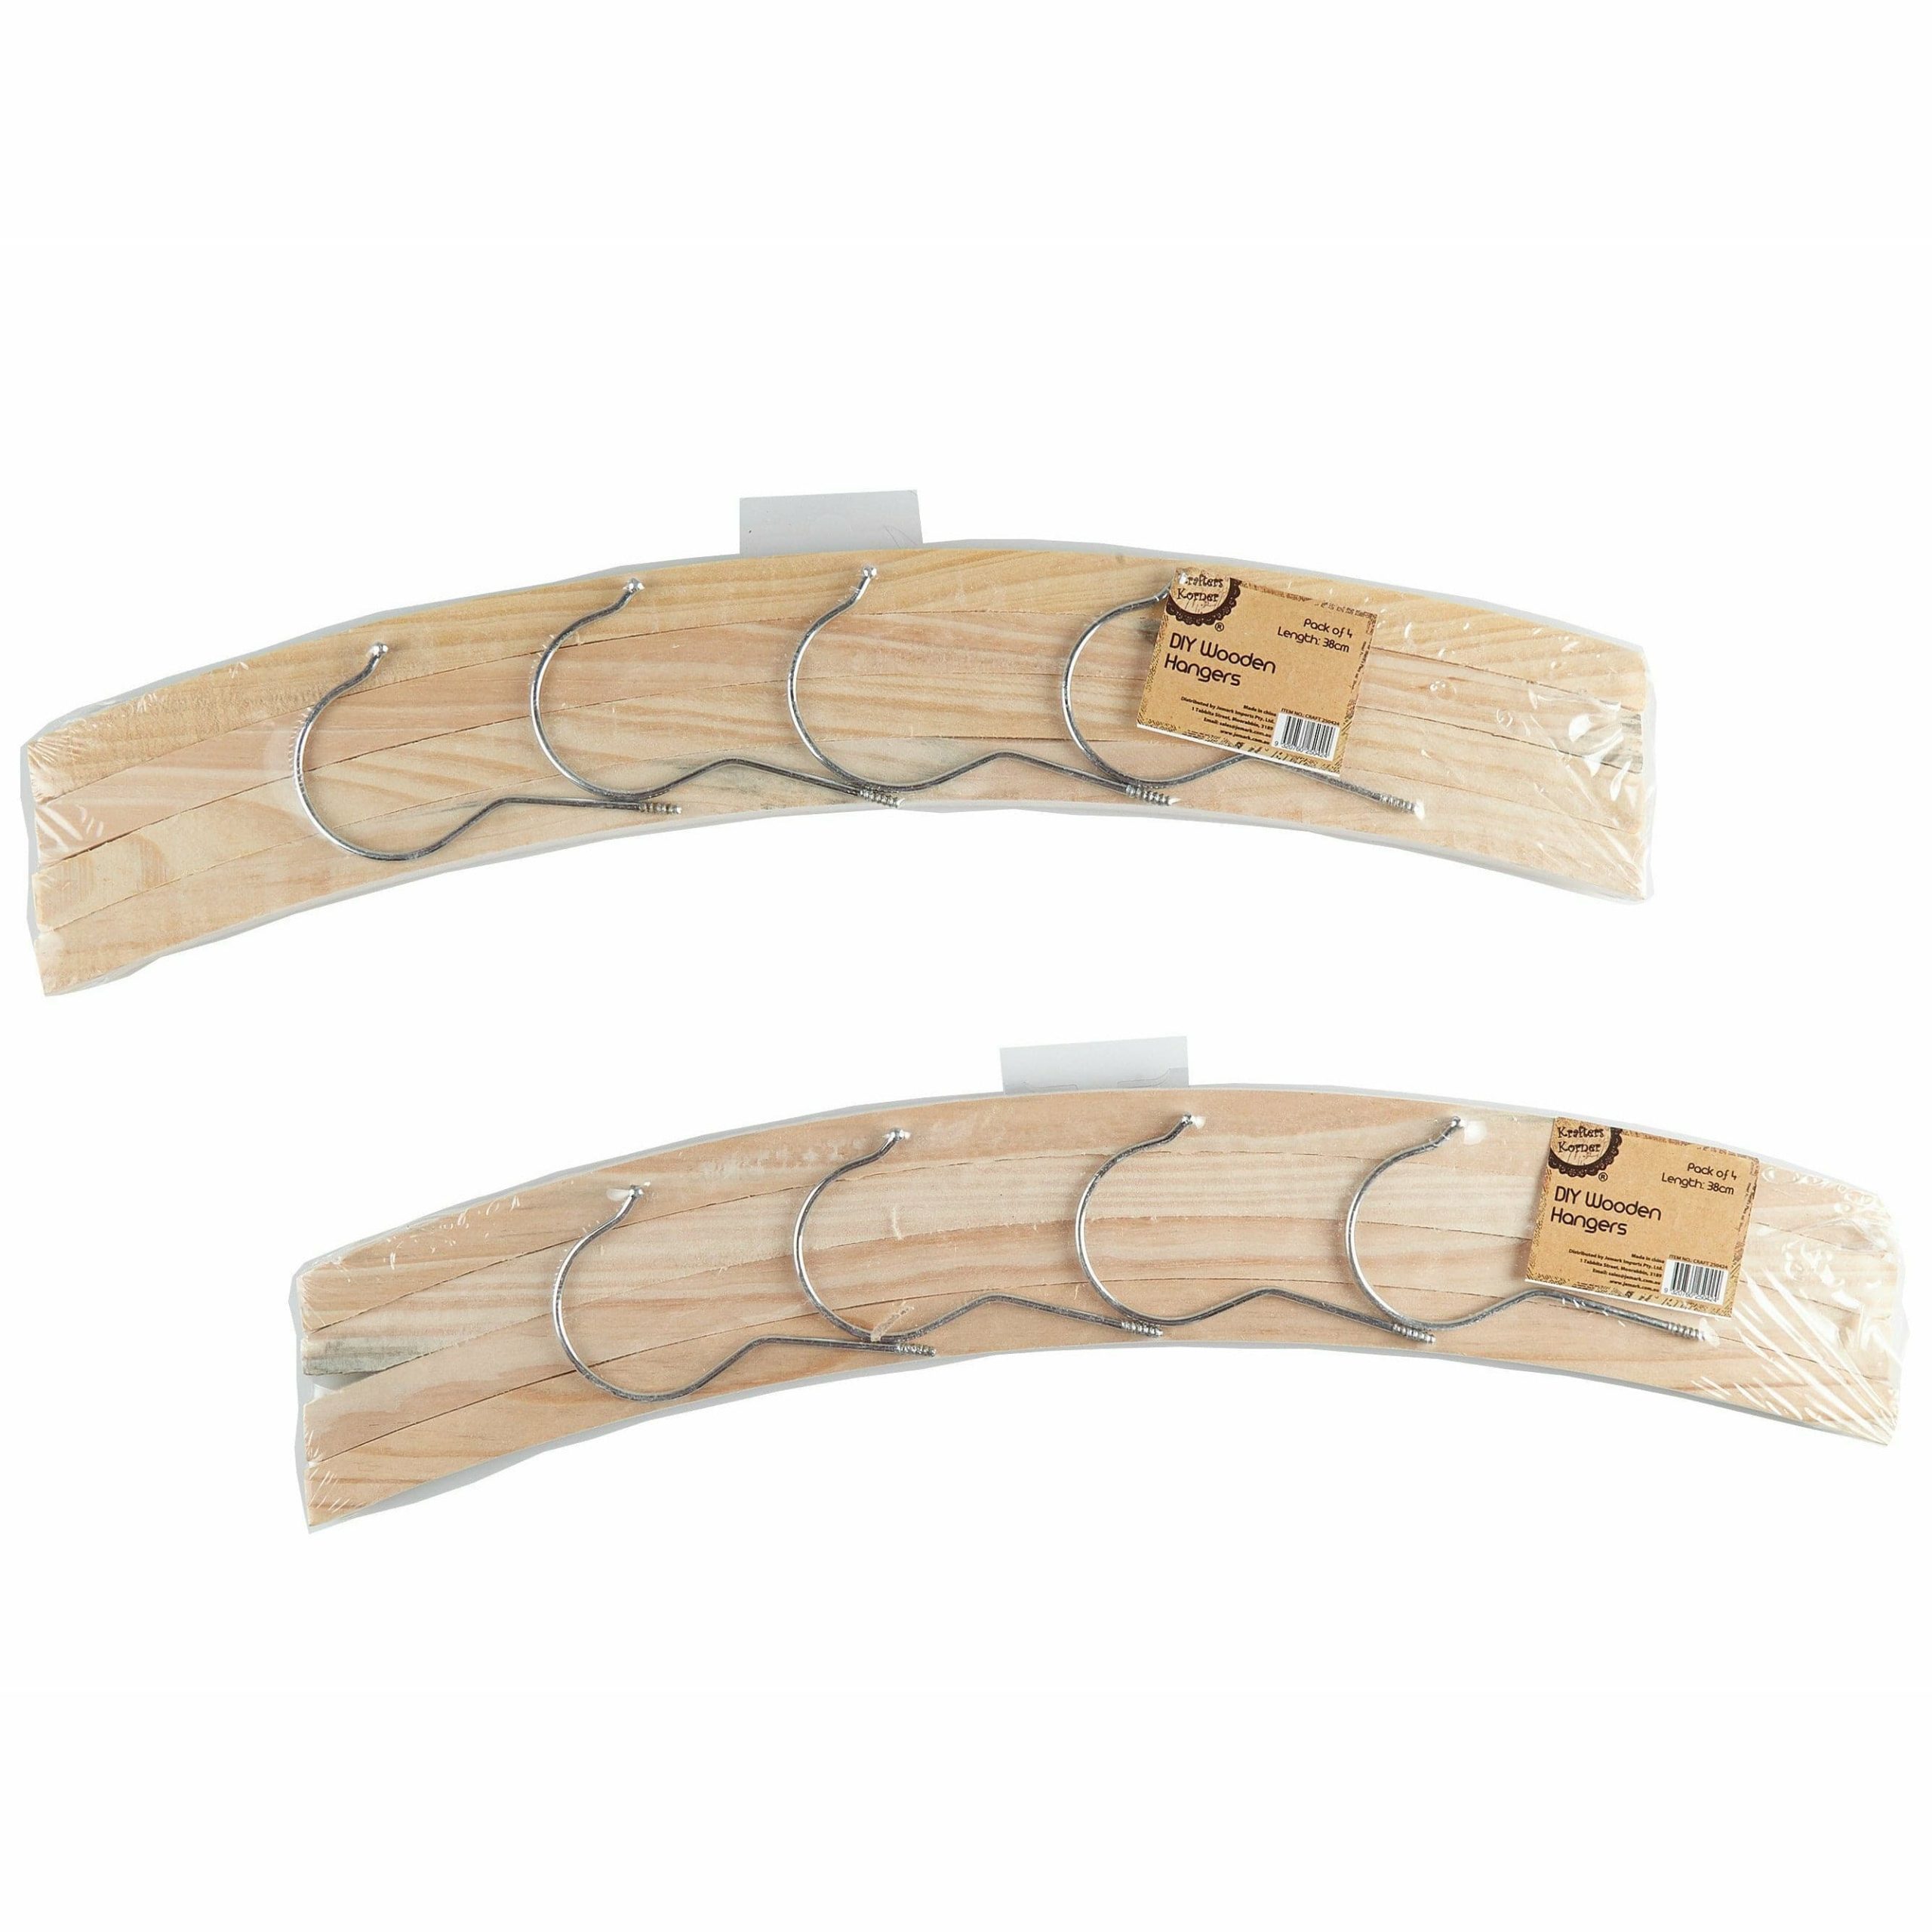 The newest Krafters Korner Adult Craft Wooden Hanger (4 Pack) Jem is now  available for purchase for sale at a bargain price